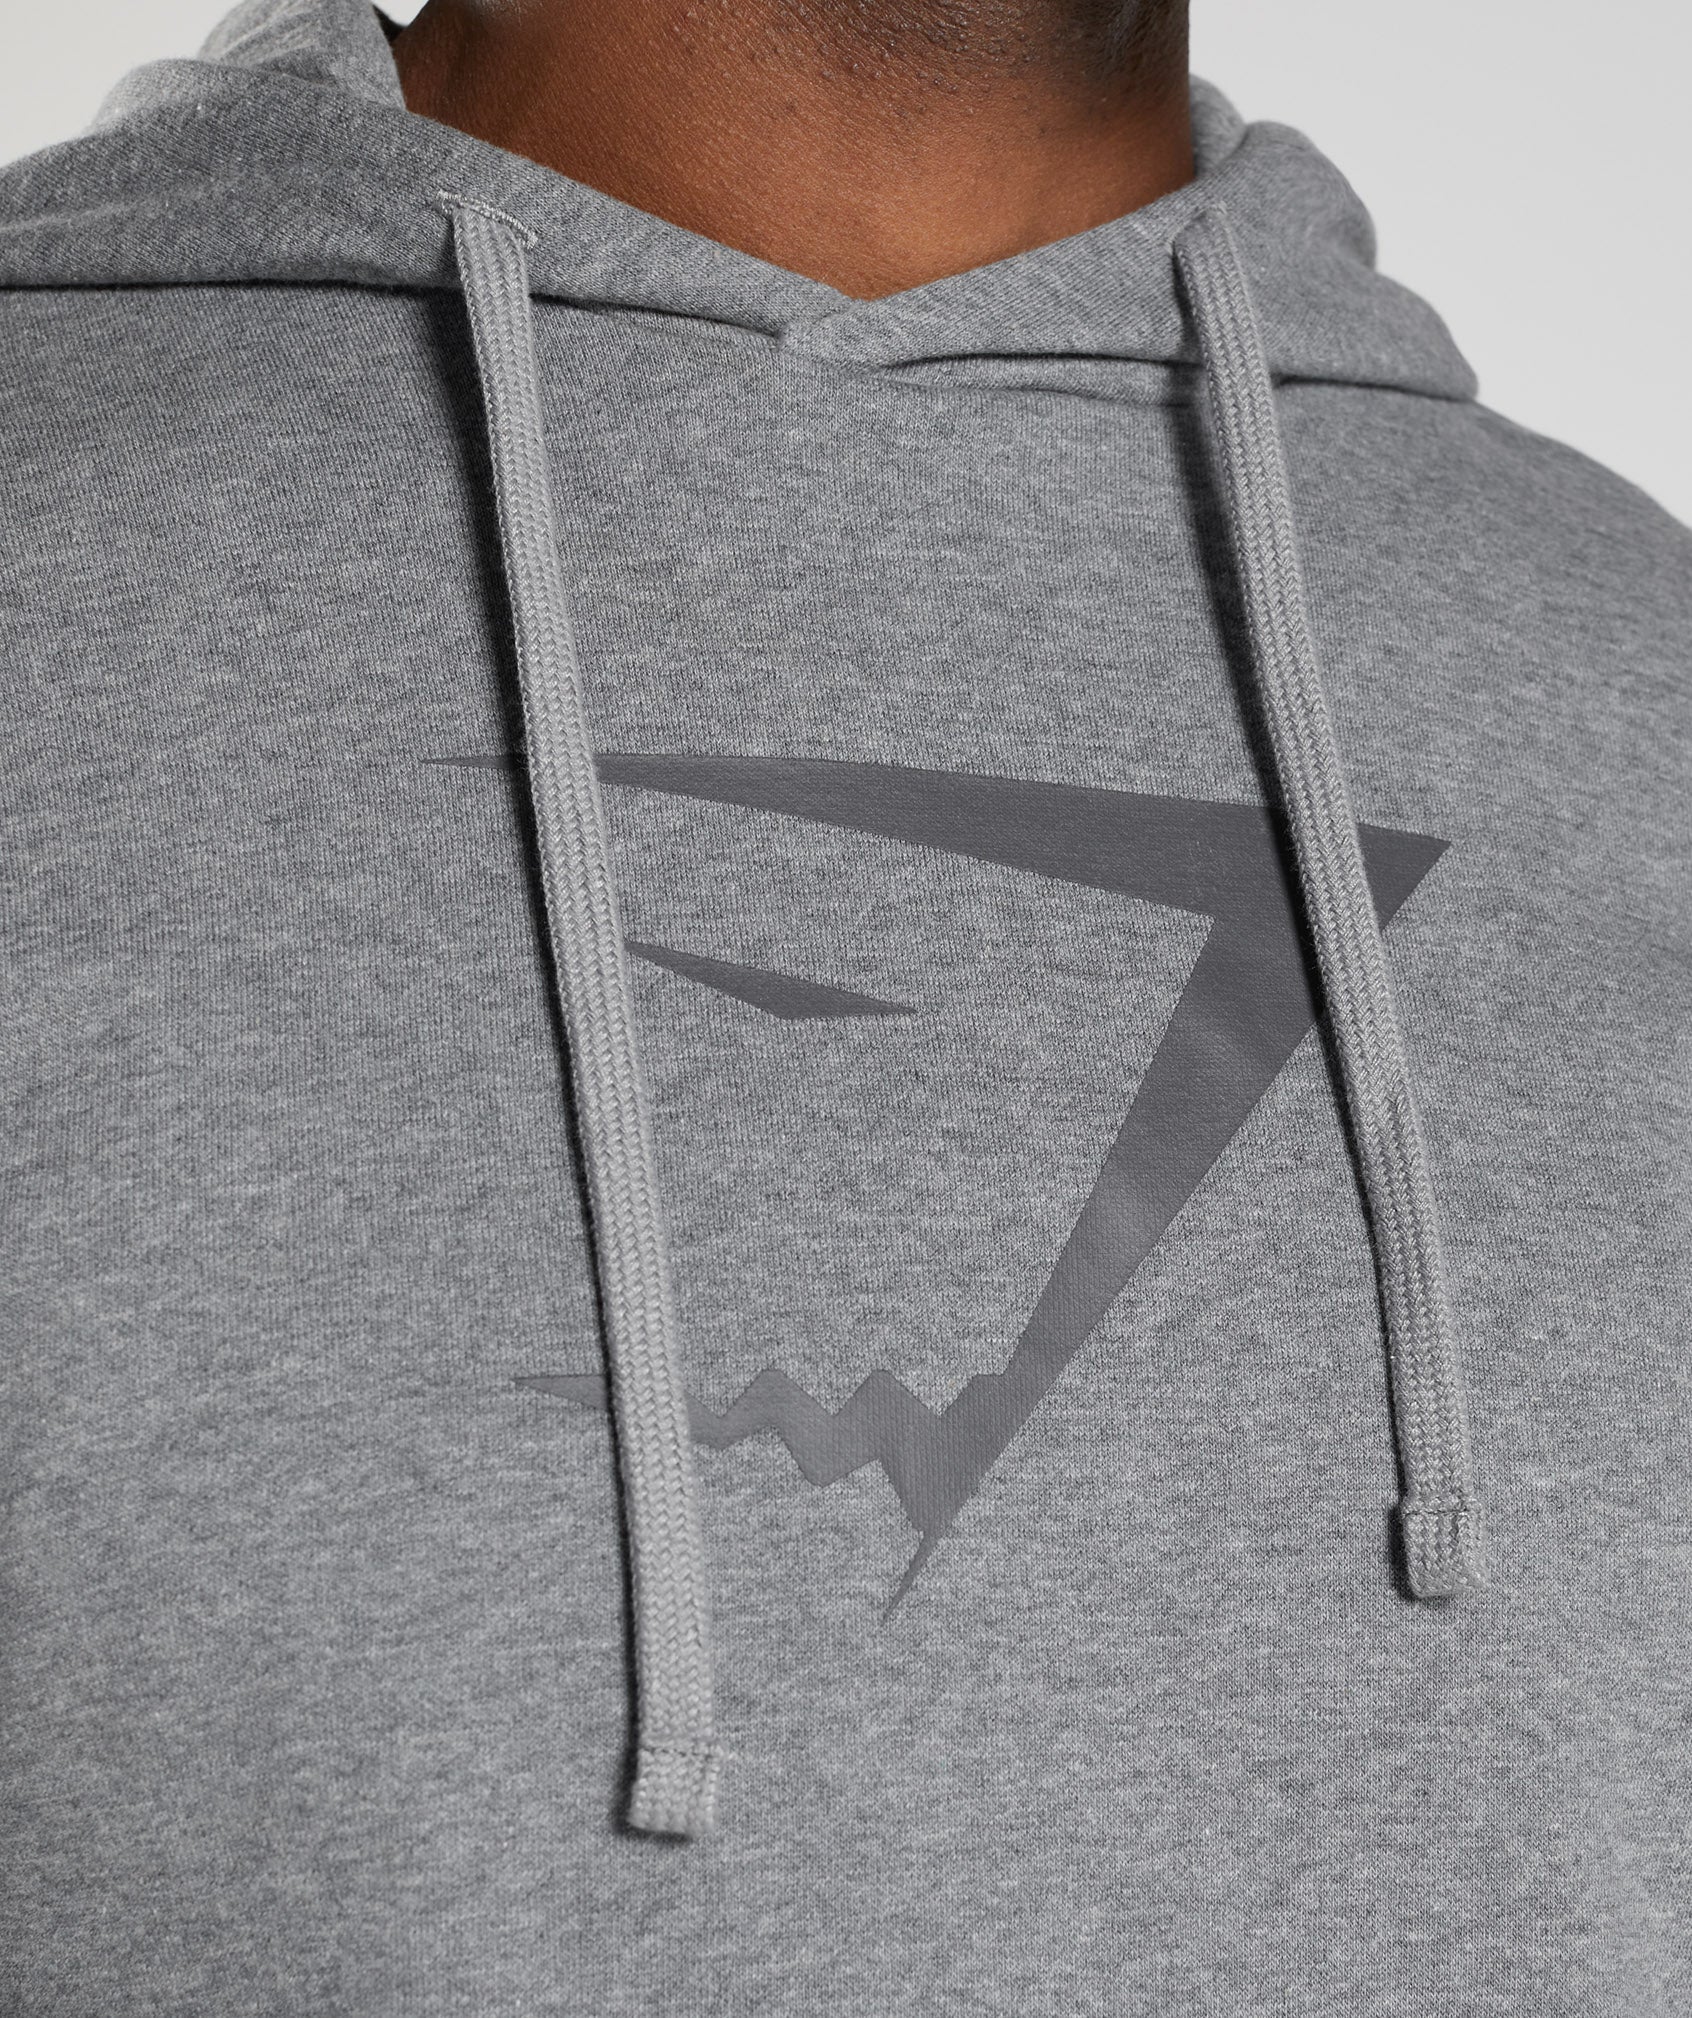 Sharkhead Infill Hoodie in Charcoal Grey Marl - view 3